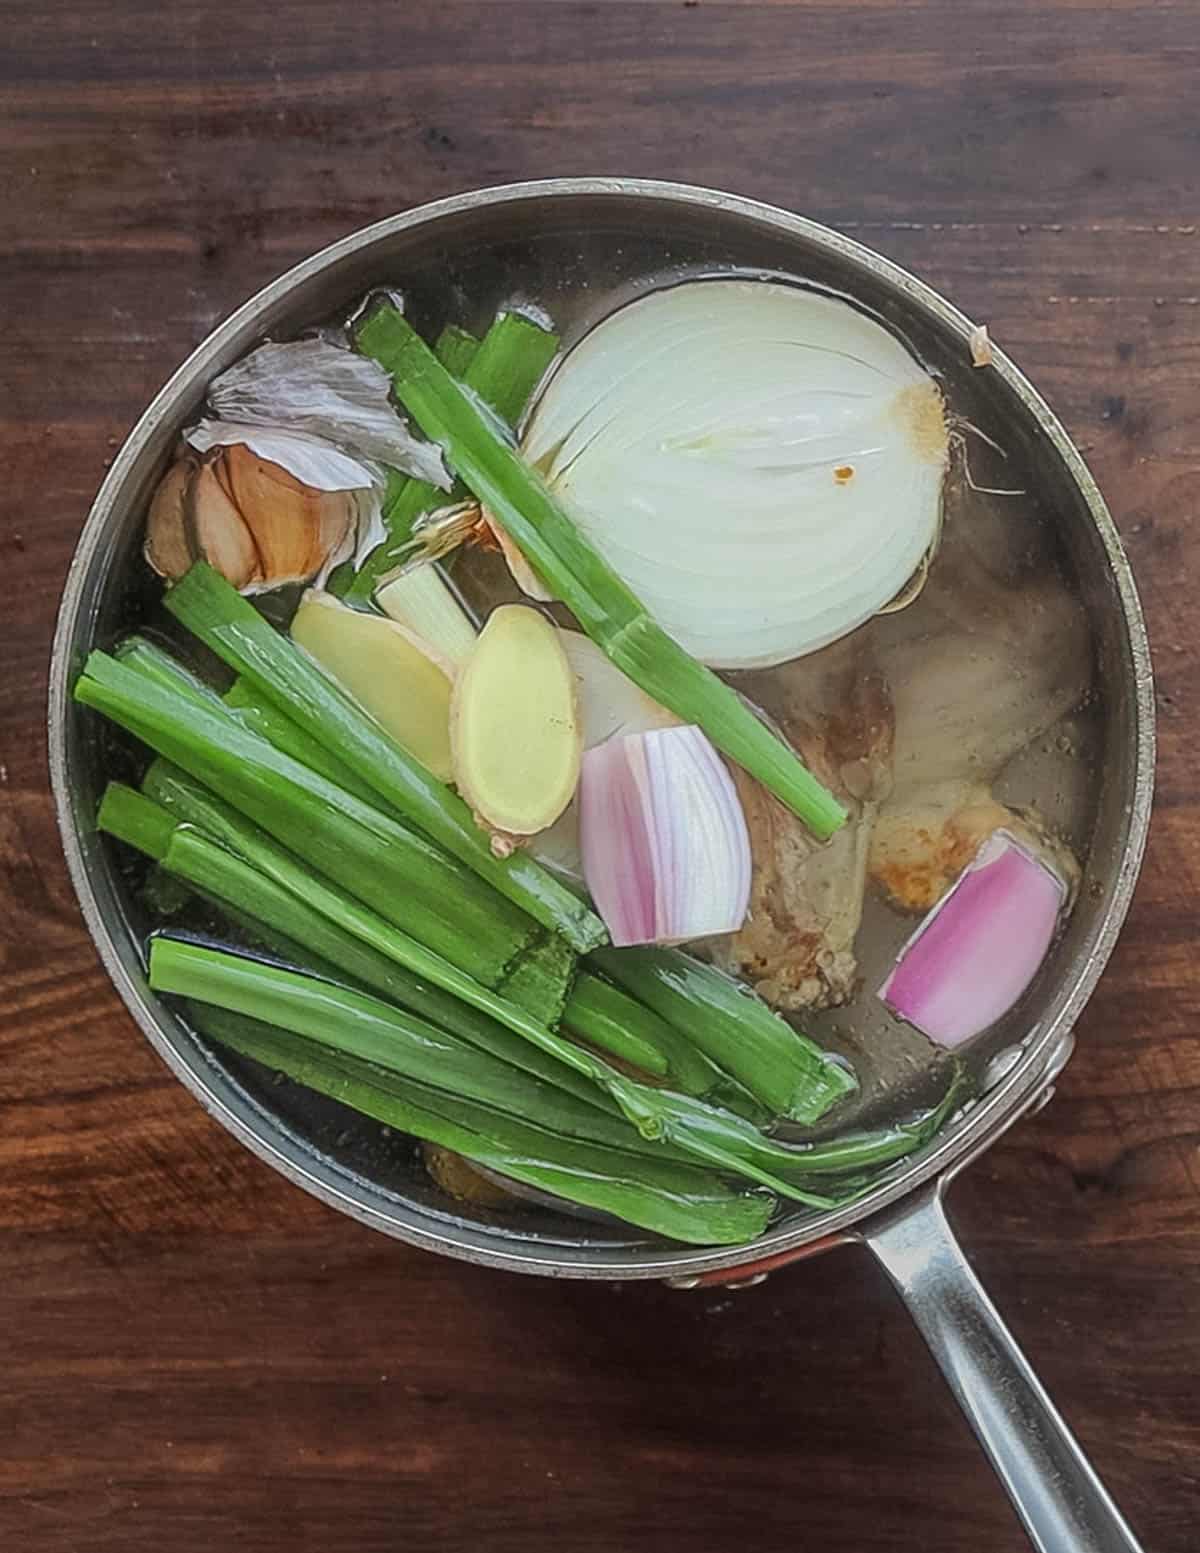 A pot of water with roasted chicken and asian ingredients ready to cook into broth.